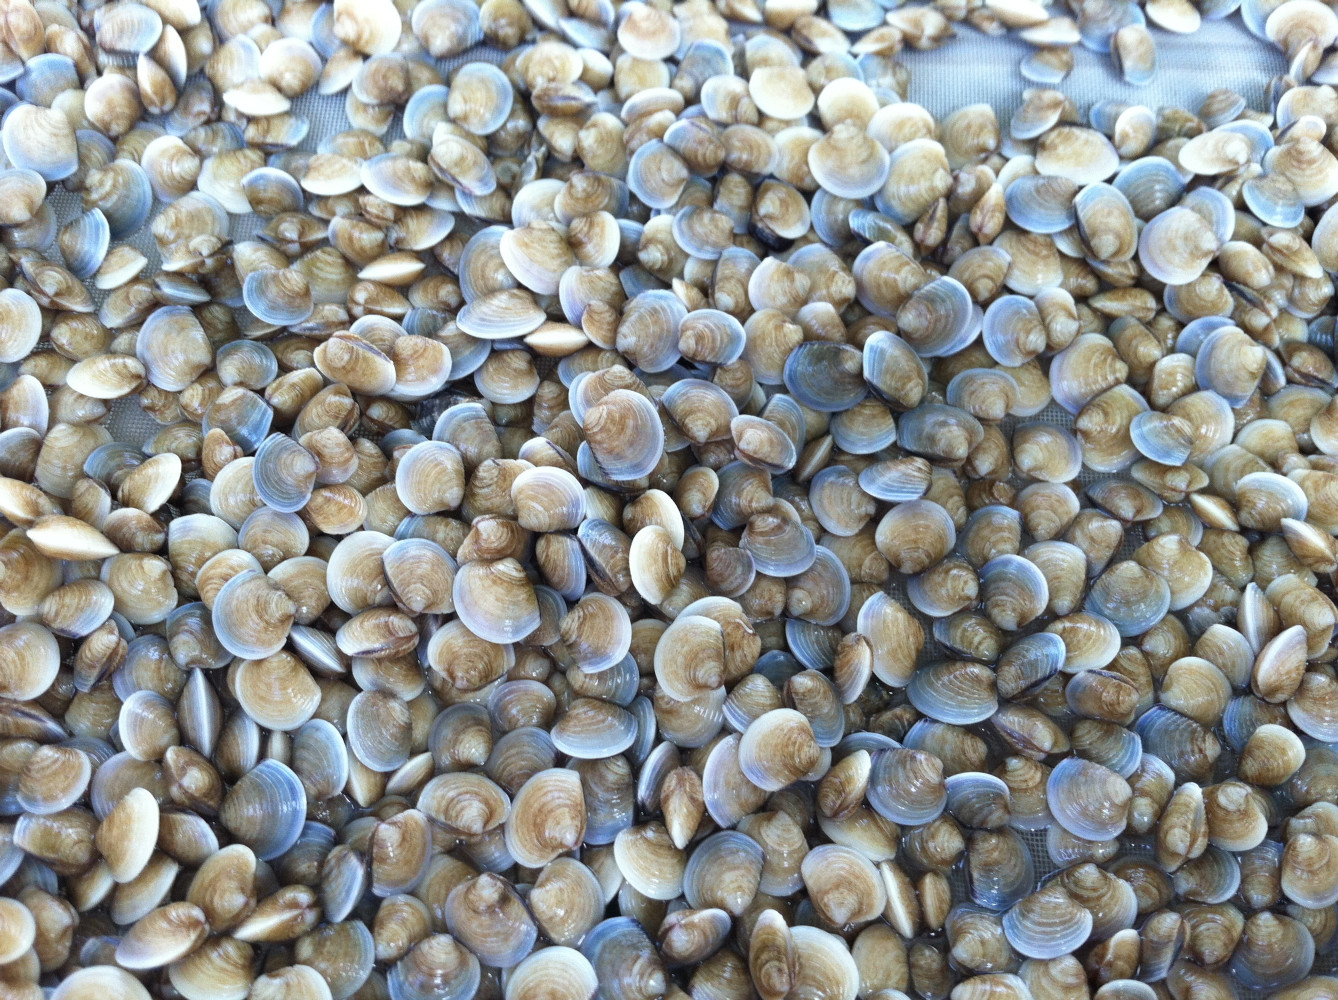 COMMERCIAL HATCHERY PRODUCTION SINCE 1996
We began producing bivalve seed with one goal in mind
"THE HIGHEST QUALITY PRODUCT AT THE MOST COMPETITIVE PRICE"

(Mercenaria mercenaria)